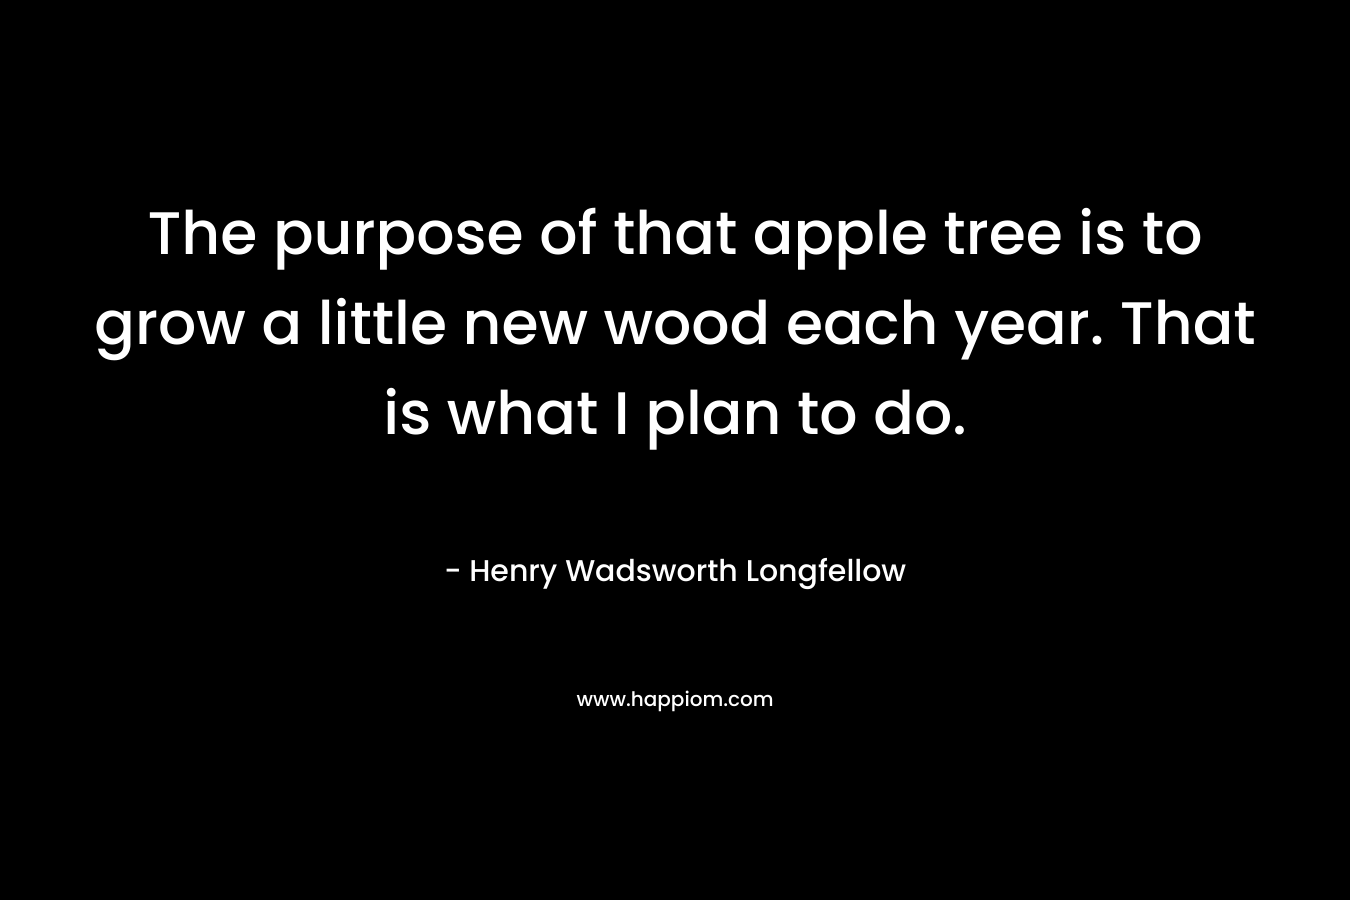 The purpose of that apple tree is to grow a little new wood each year. That is what I plan to do.